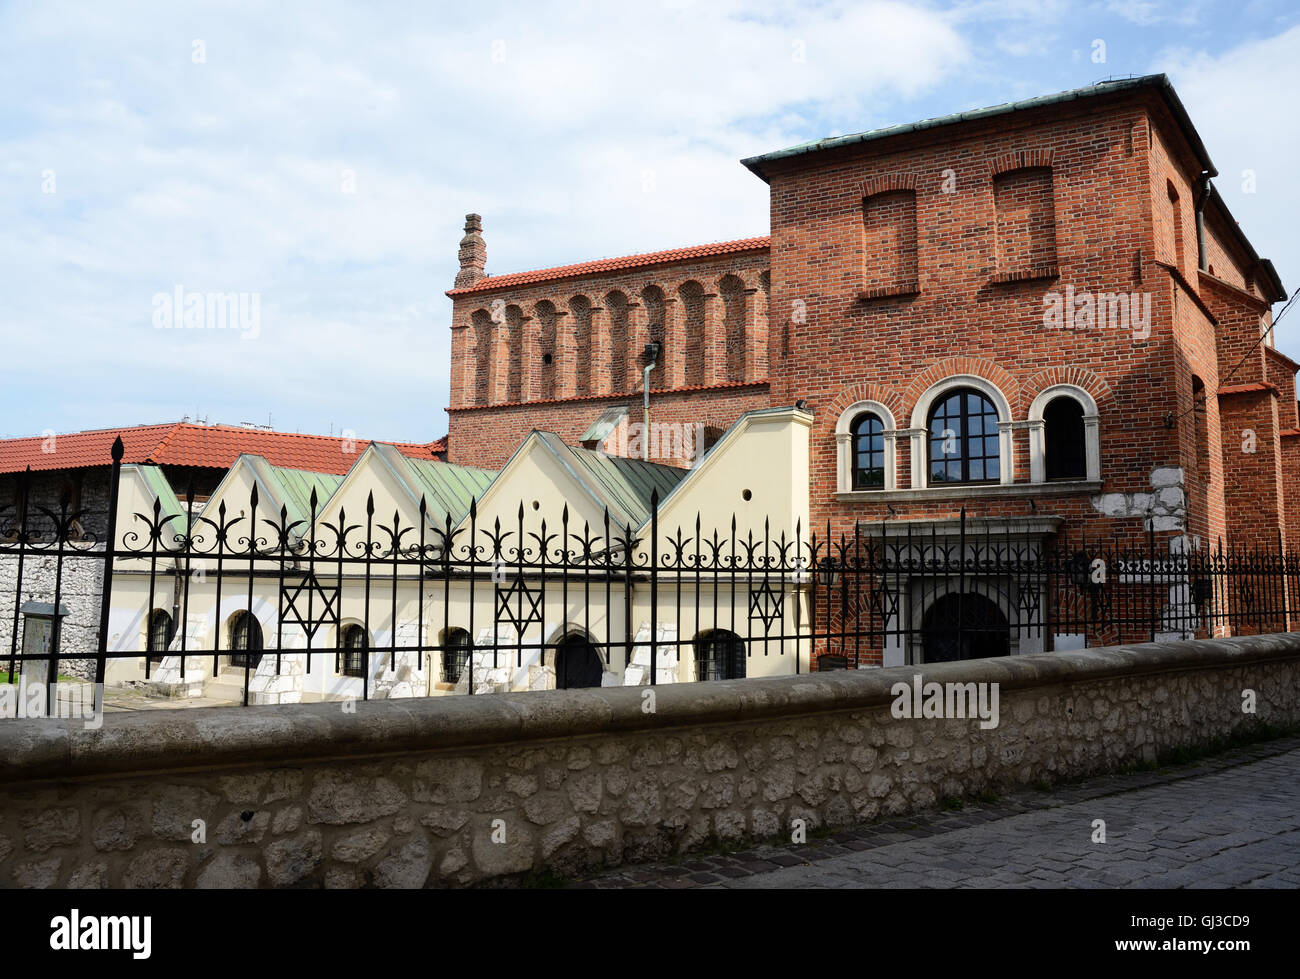 Old Synagogue or Orthodox Jewish synagogue in the Kazimierz district of Krakow (Cracow), Poland Stock Photo